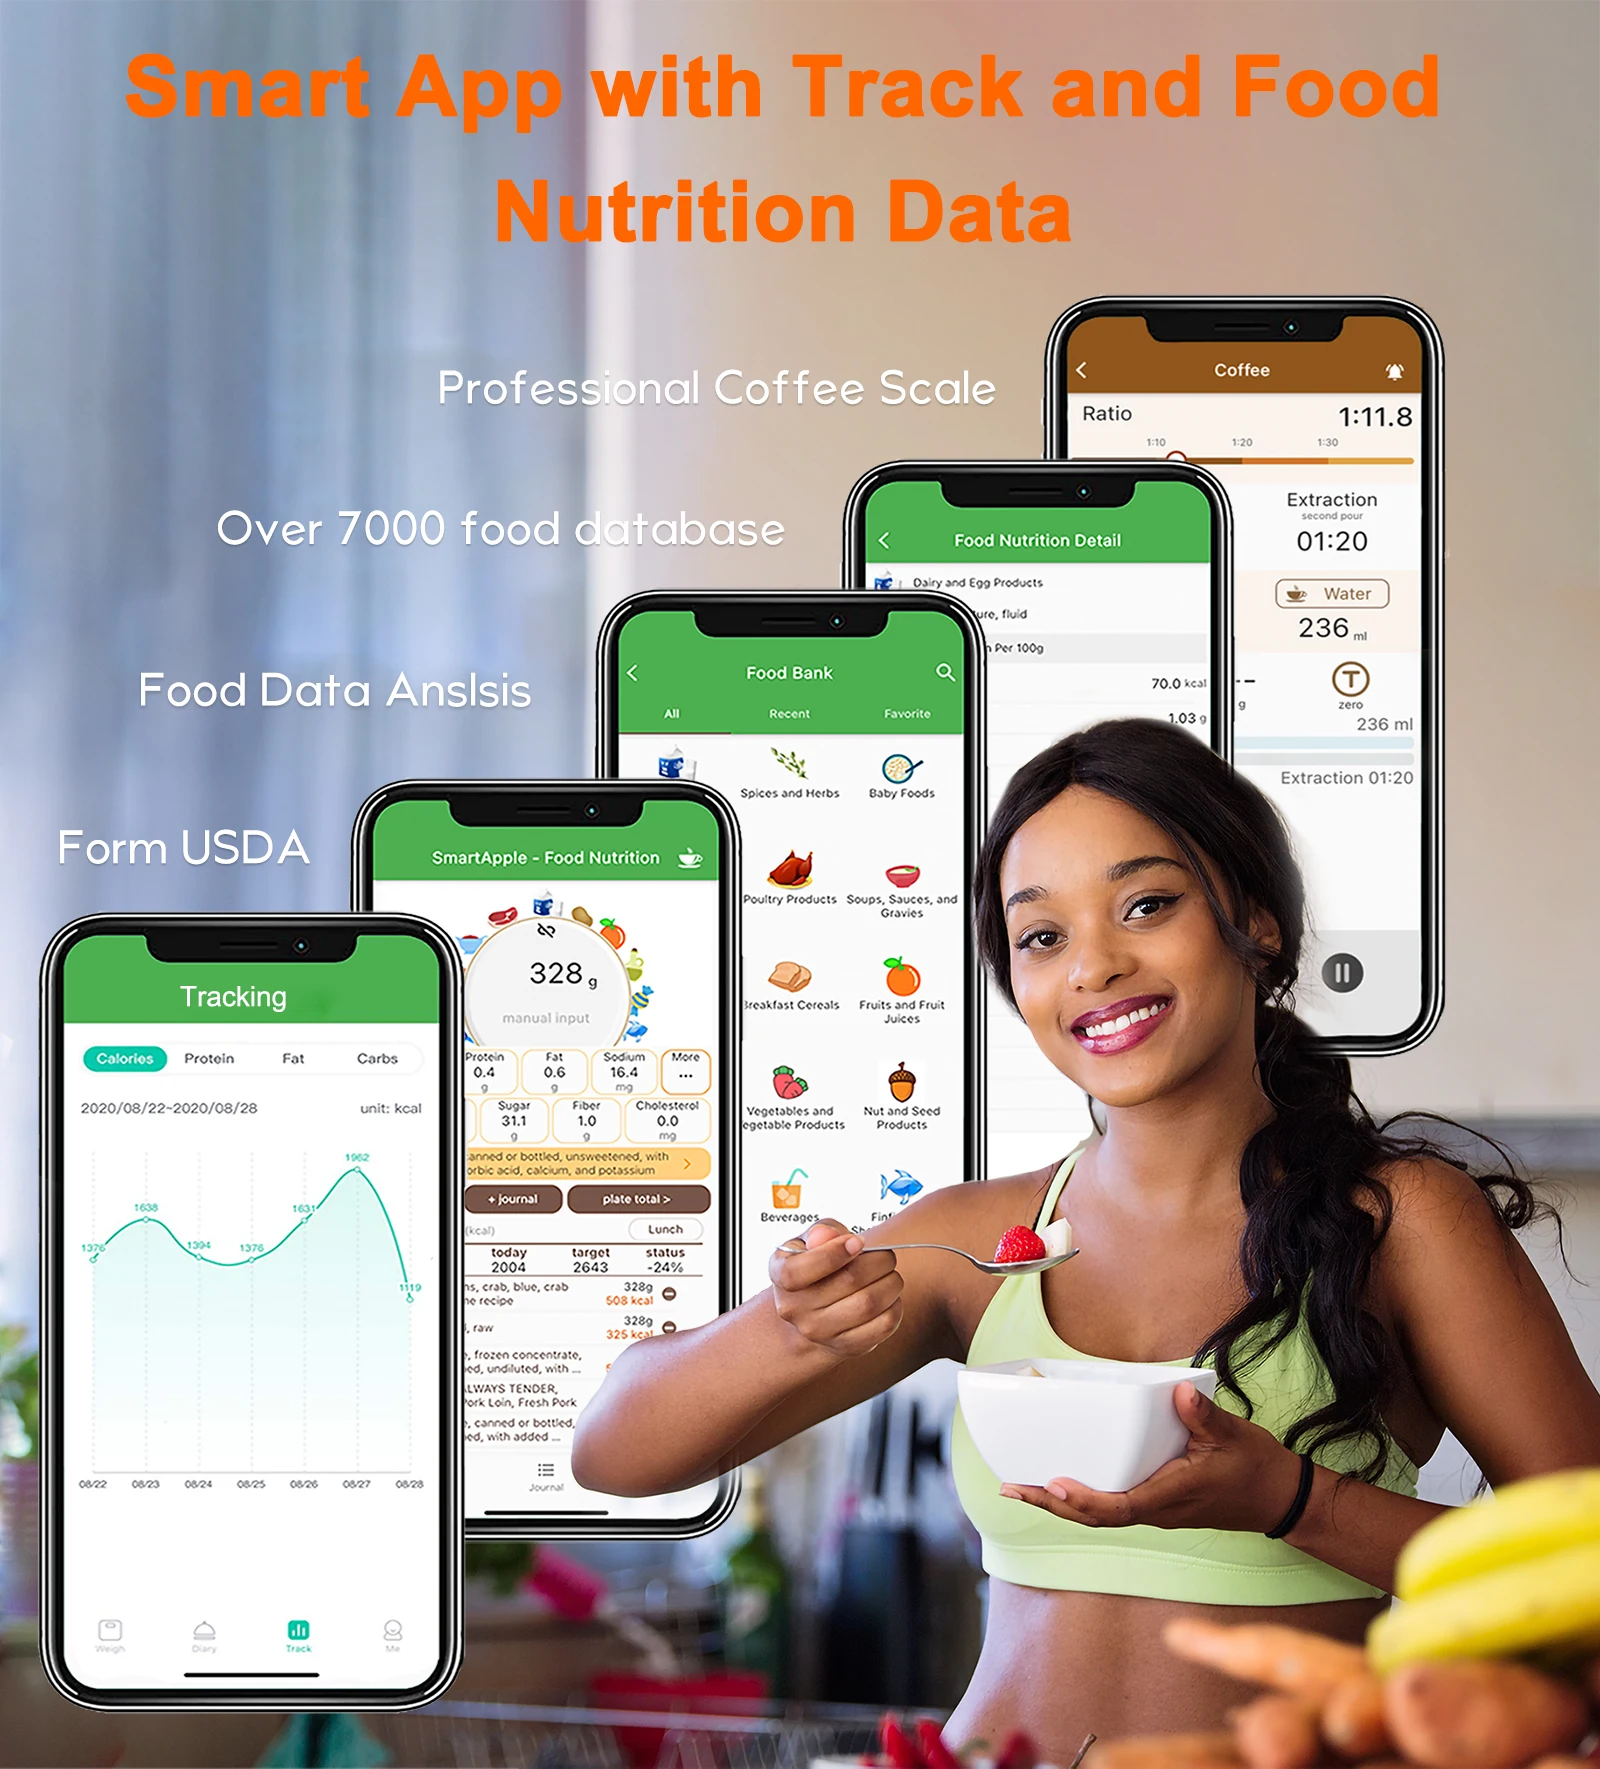 https://ae01.alicdn.com/kf/S6690bada4d7a47a79a17810d4dc59b32c/Ataller-Smart-Kitchen-Food-Scale-Electronic-Bluetooth-APP-Digital-Weight-Balance-With-Nutrition-Analysis-5kg-Stainless.jpg